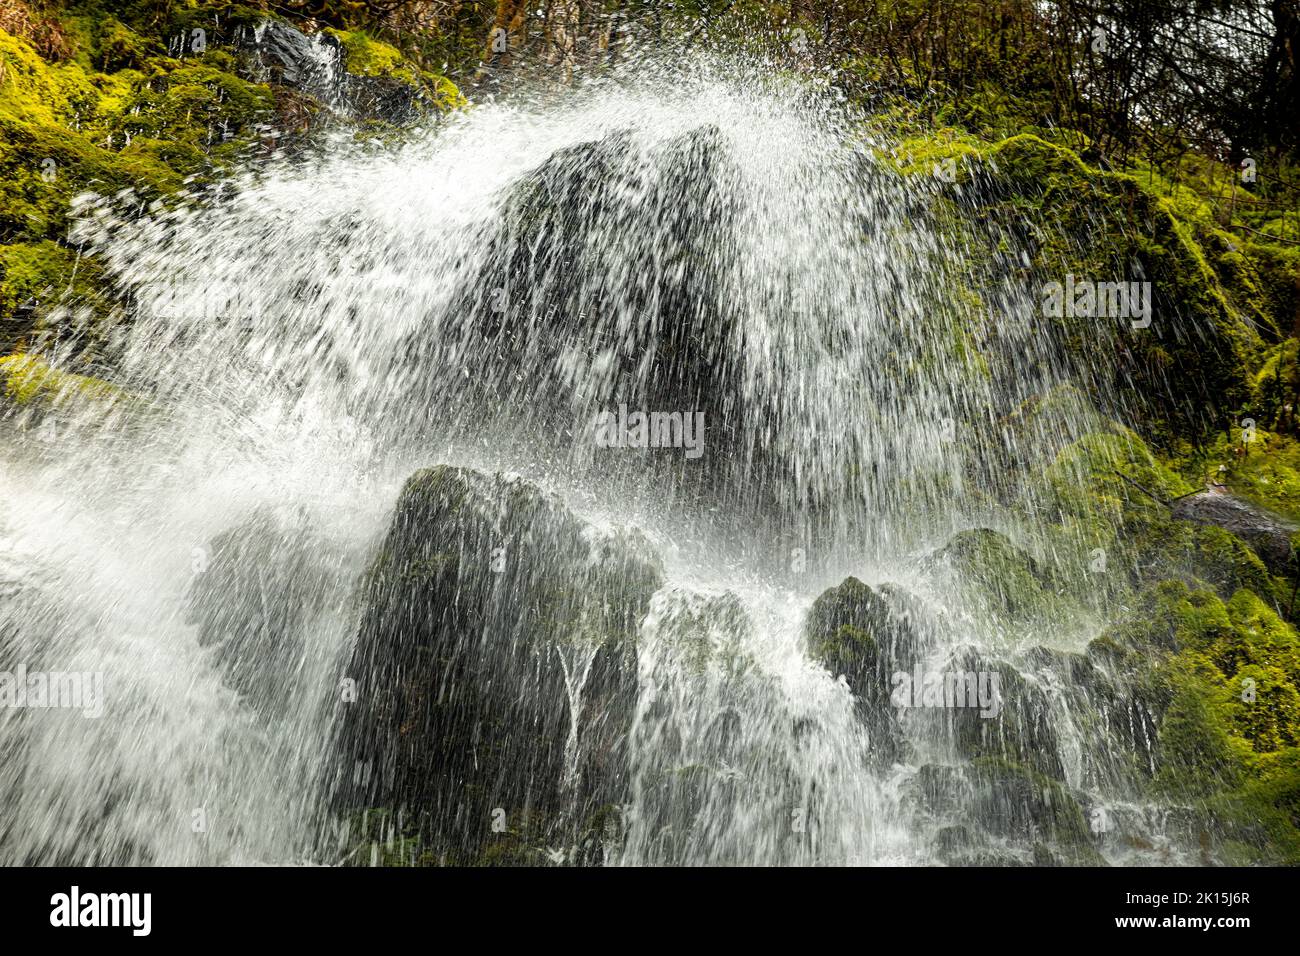 WA22038-00...WASHINGTON - Waterfall on an unnamed creek up valley from Mineral Creek in the Hoh Rain Forest of Olympic National Park. Stock Photo